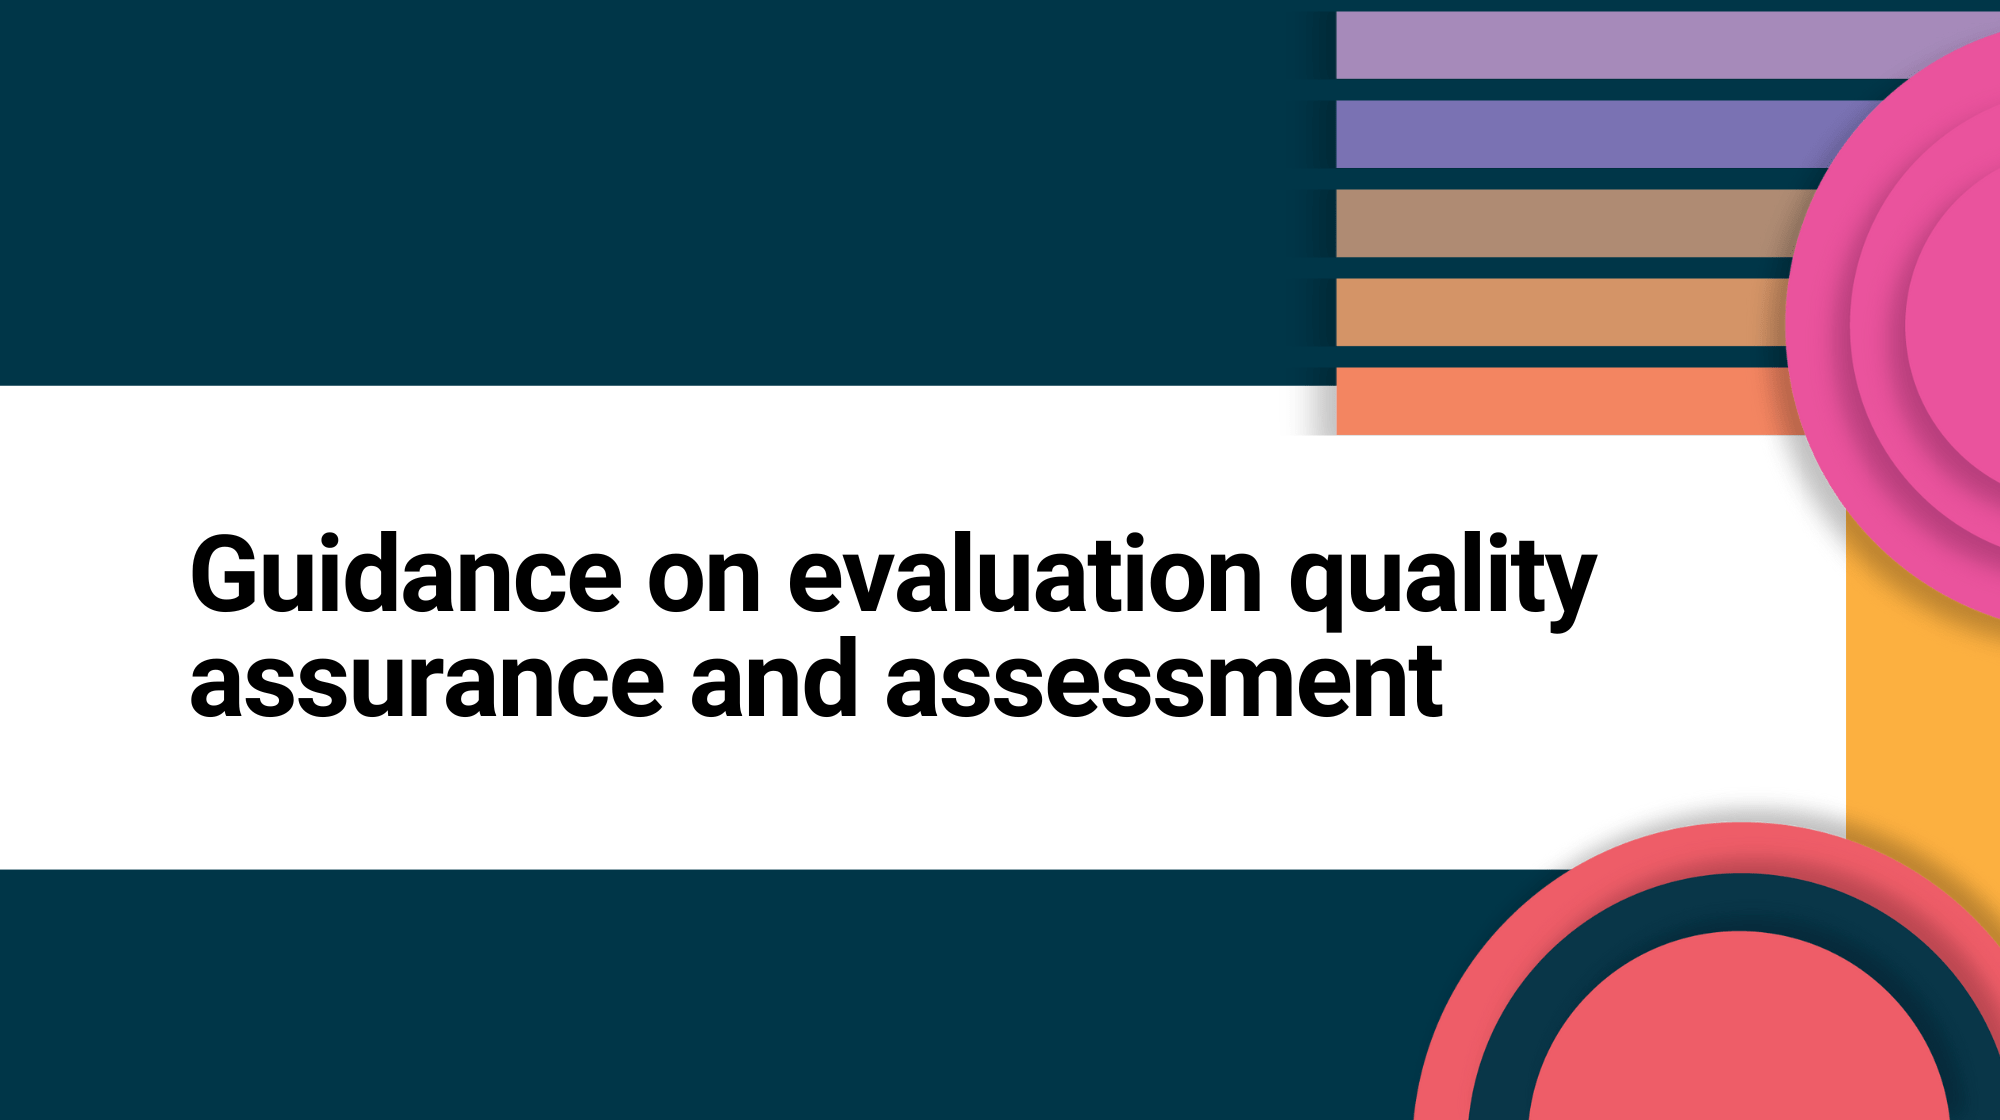 Guidance on evaluation quality assurance and assessment